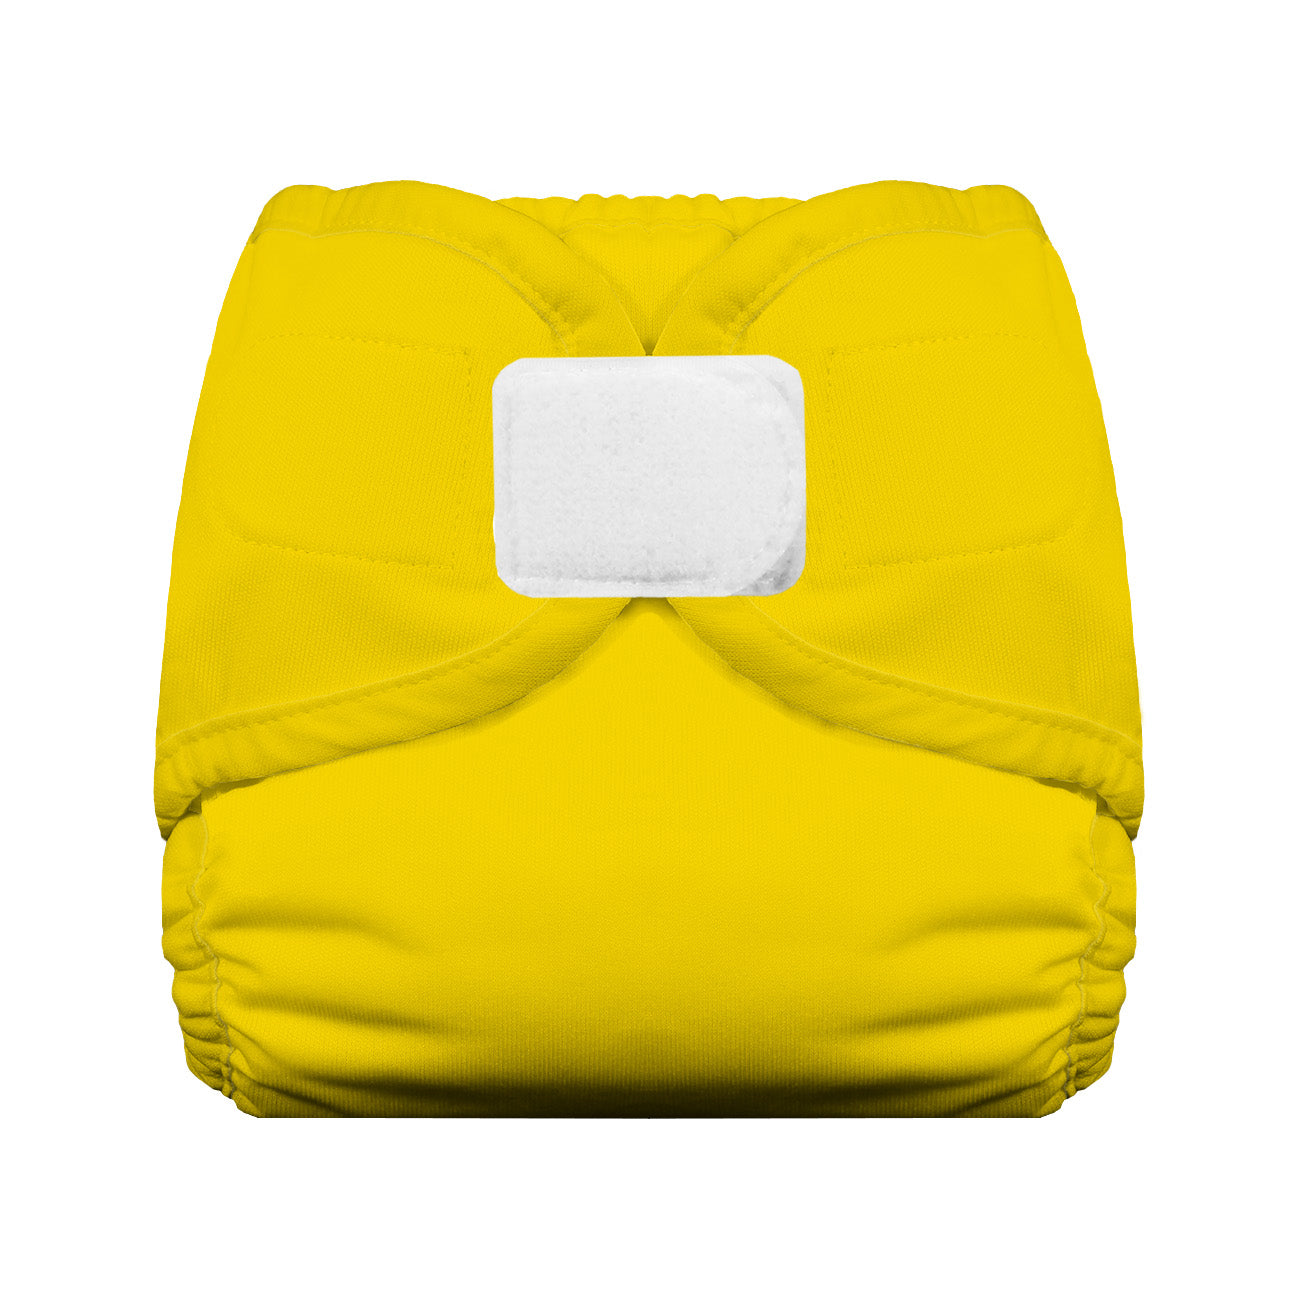 Image of Thirsties Diaper Cover in Sunshine with hook and loop